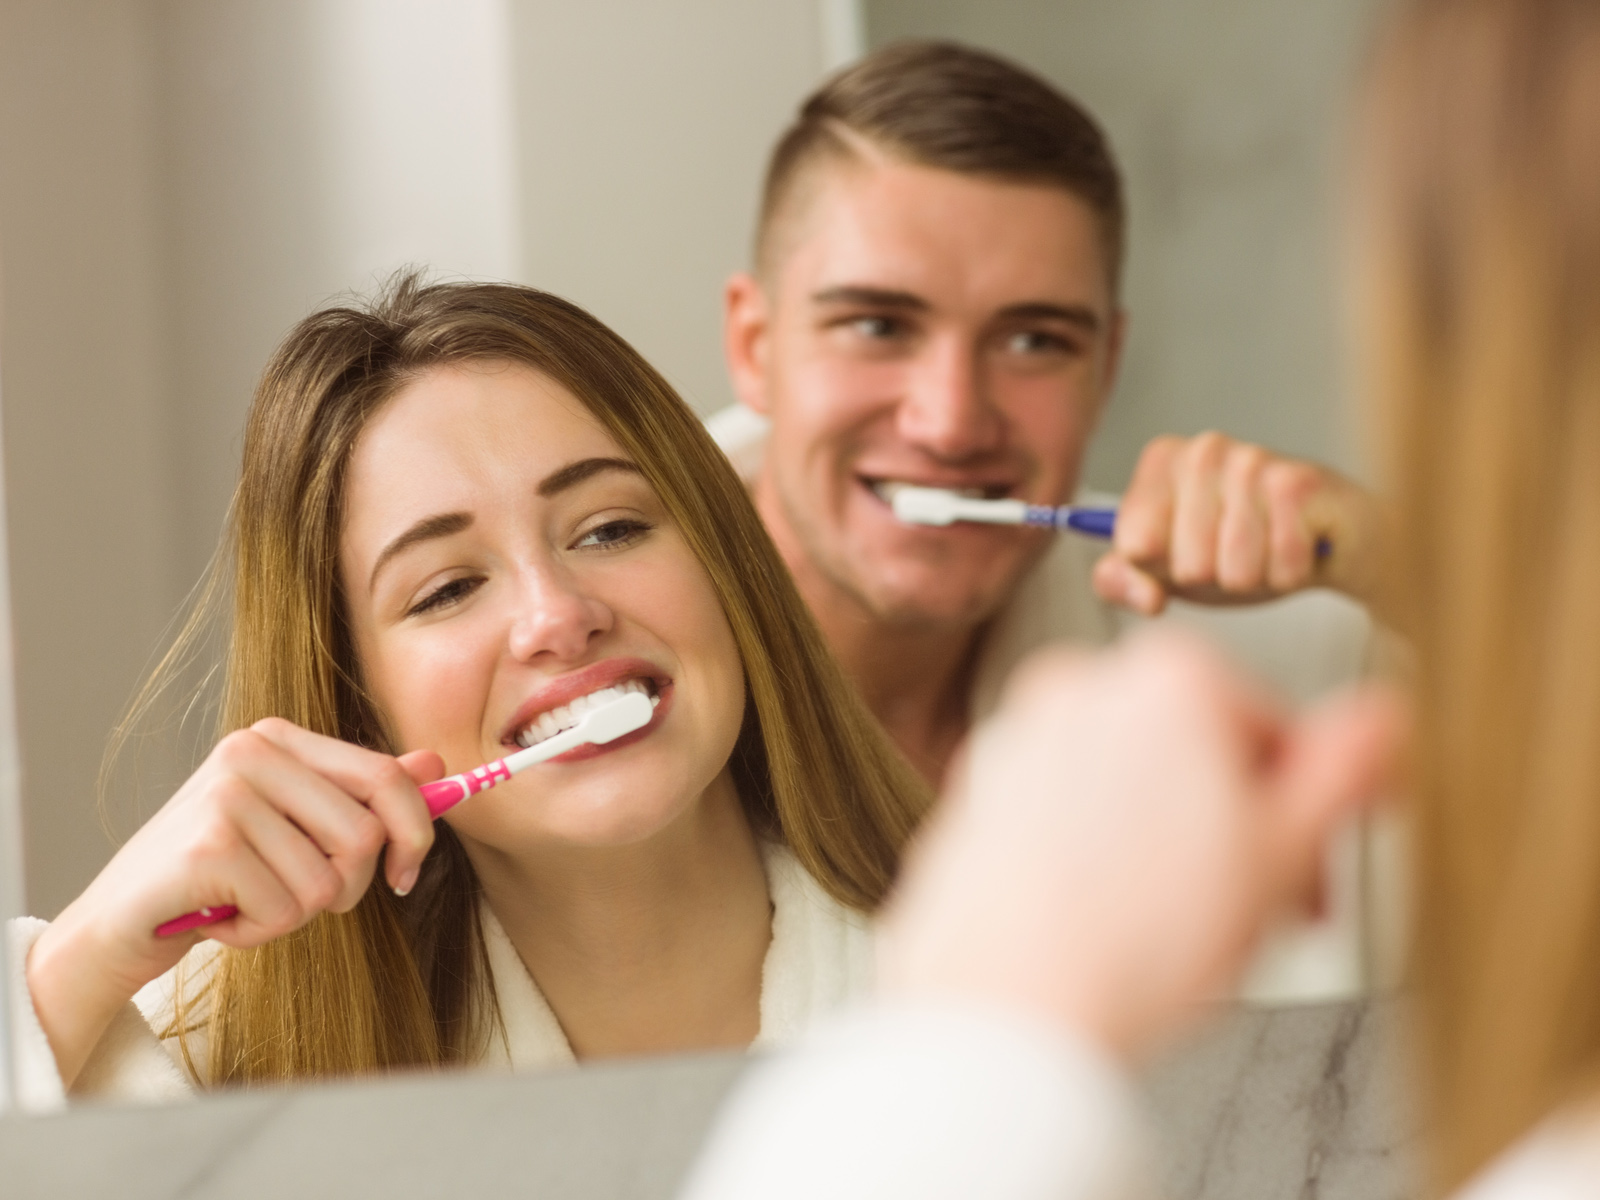 What Should be Your Ideal Teeth Routine?